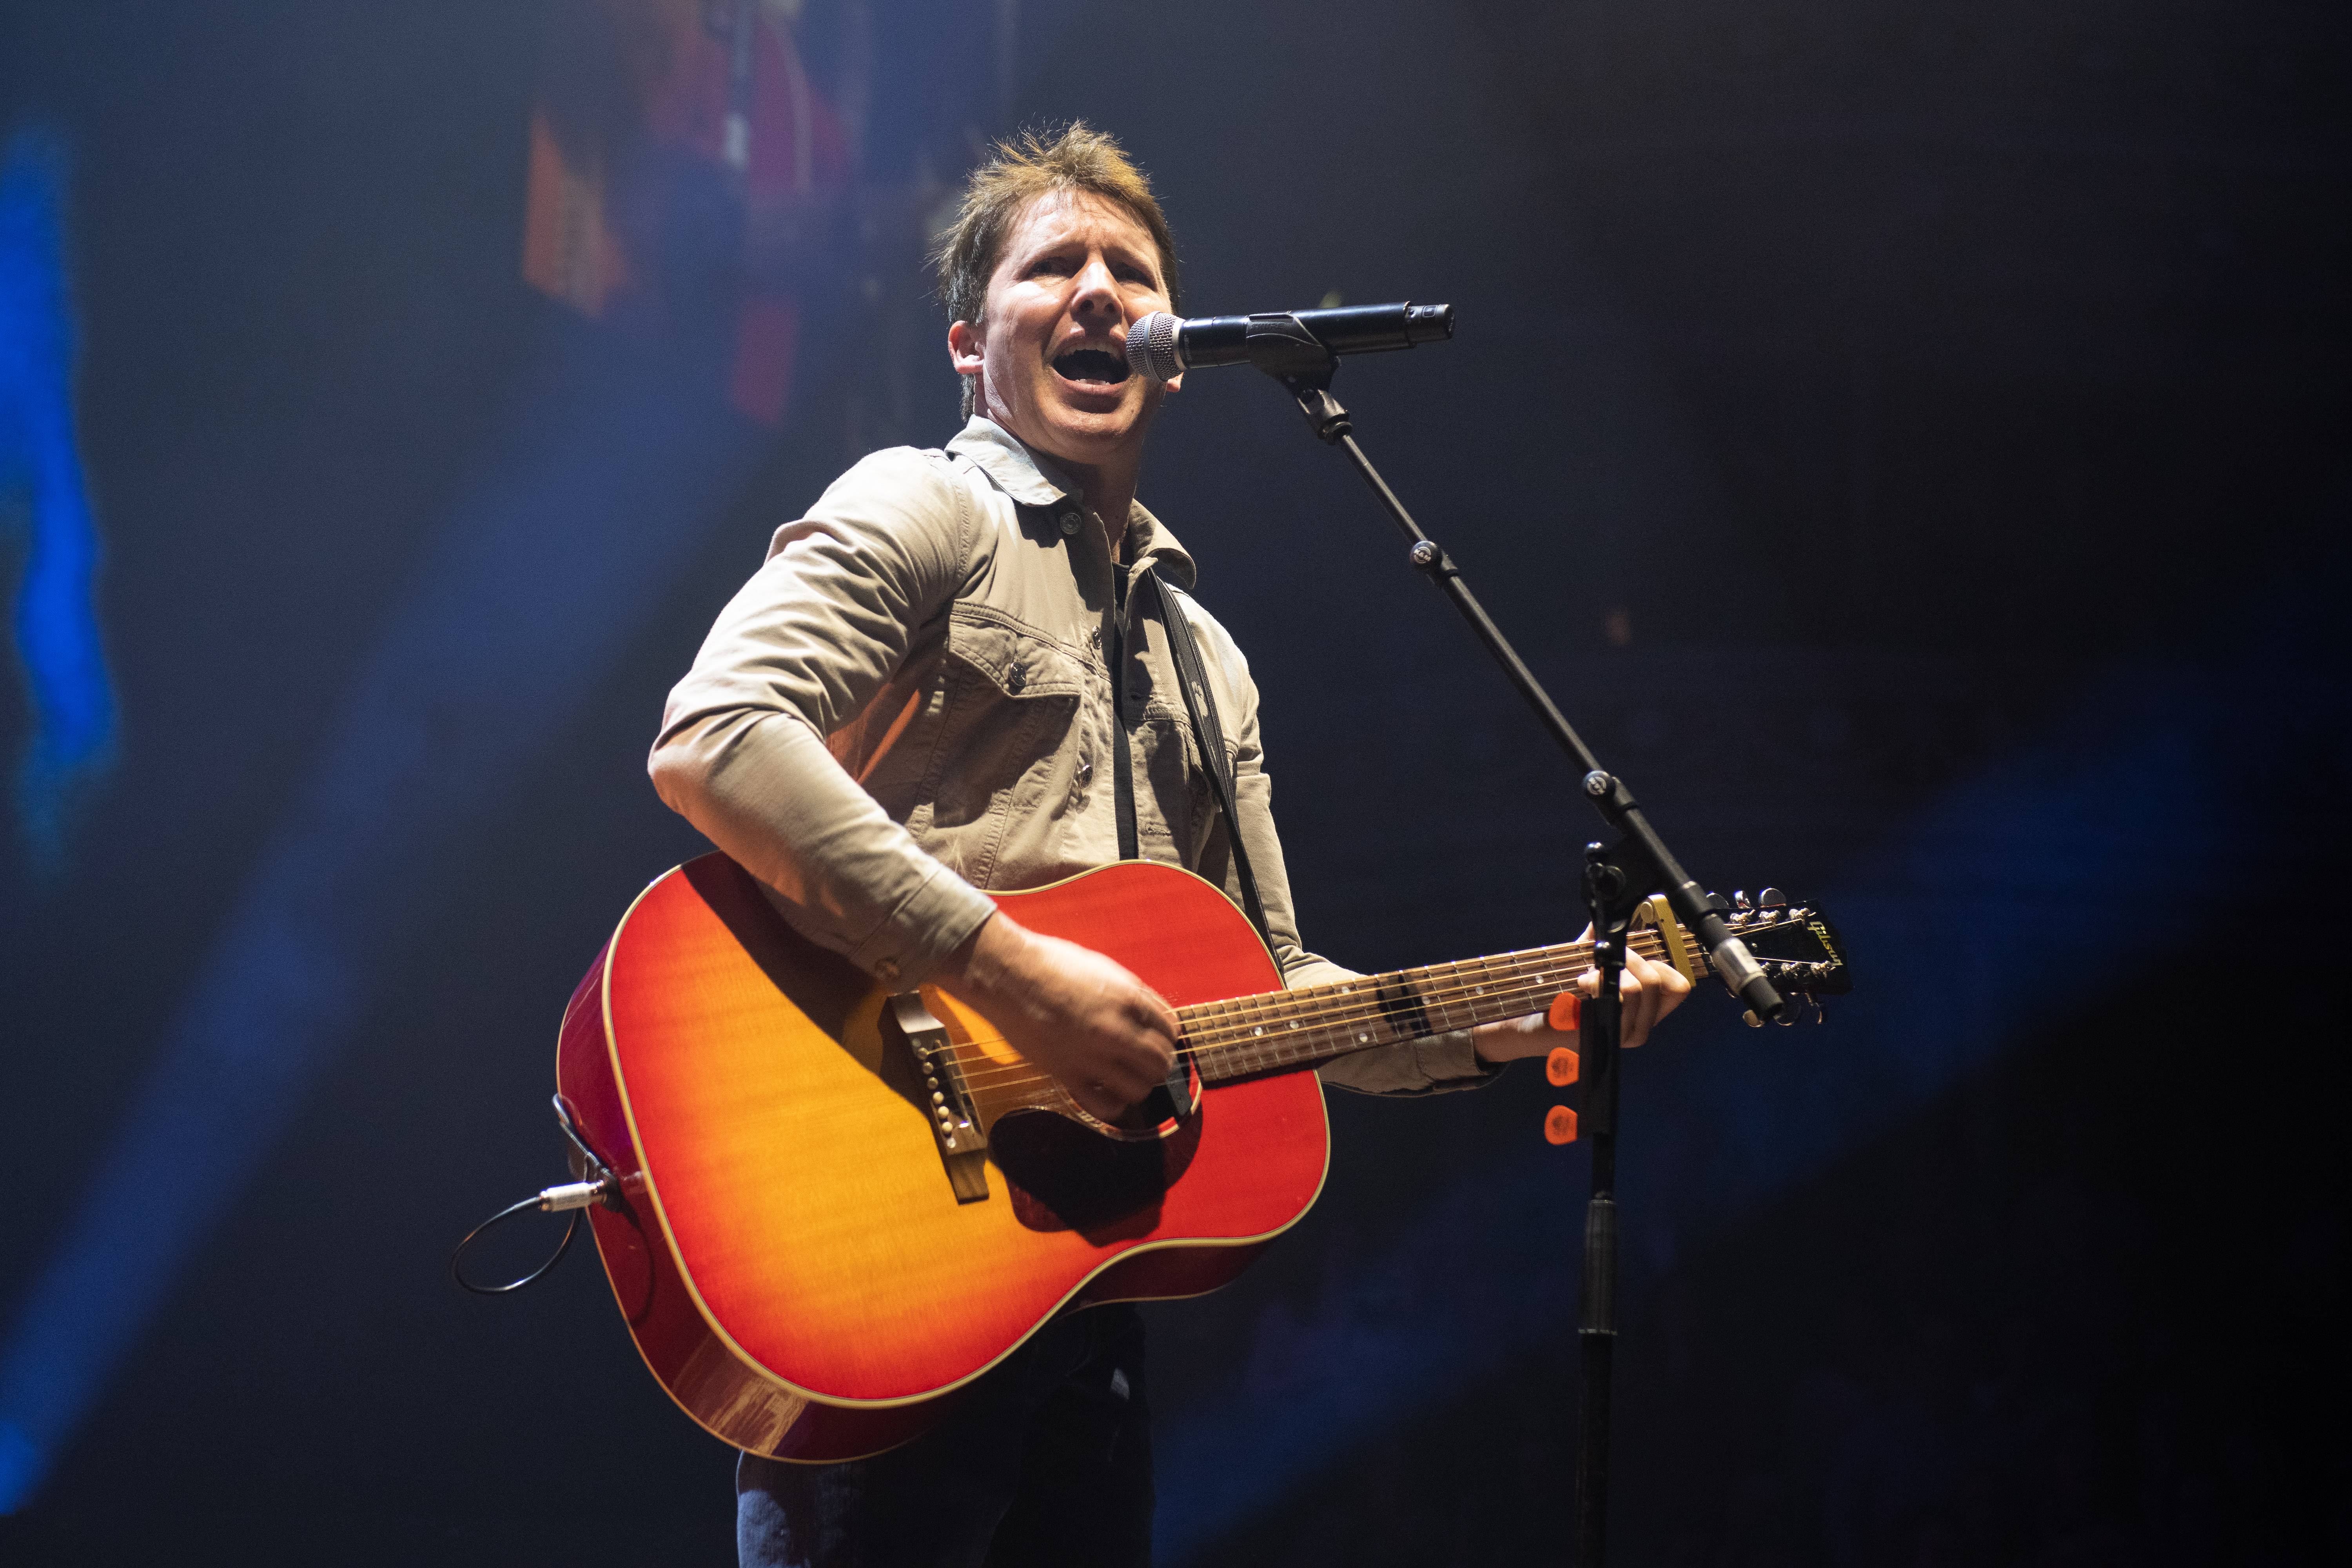 James Blunt's performance at the Royal Albert Hall was breathtaking